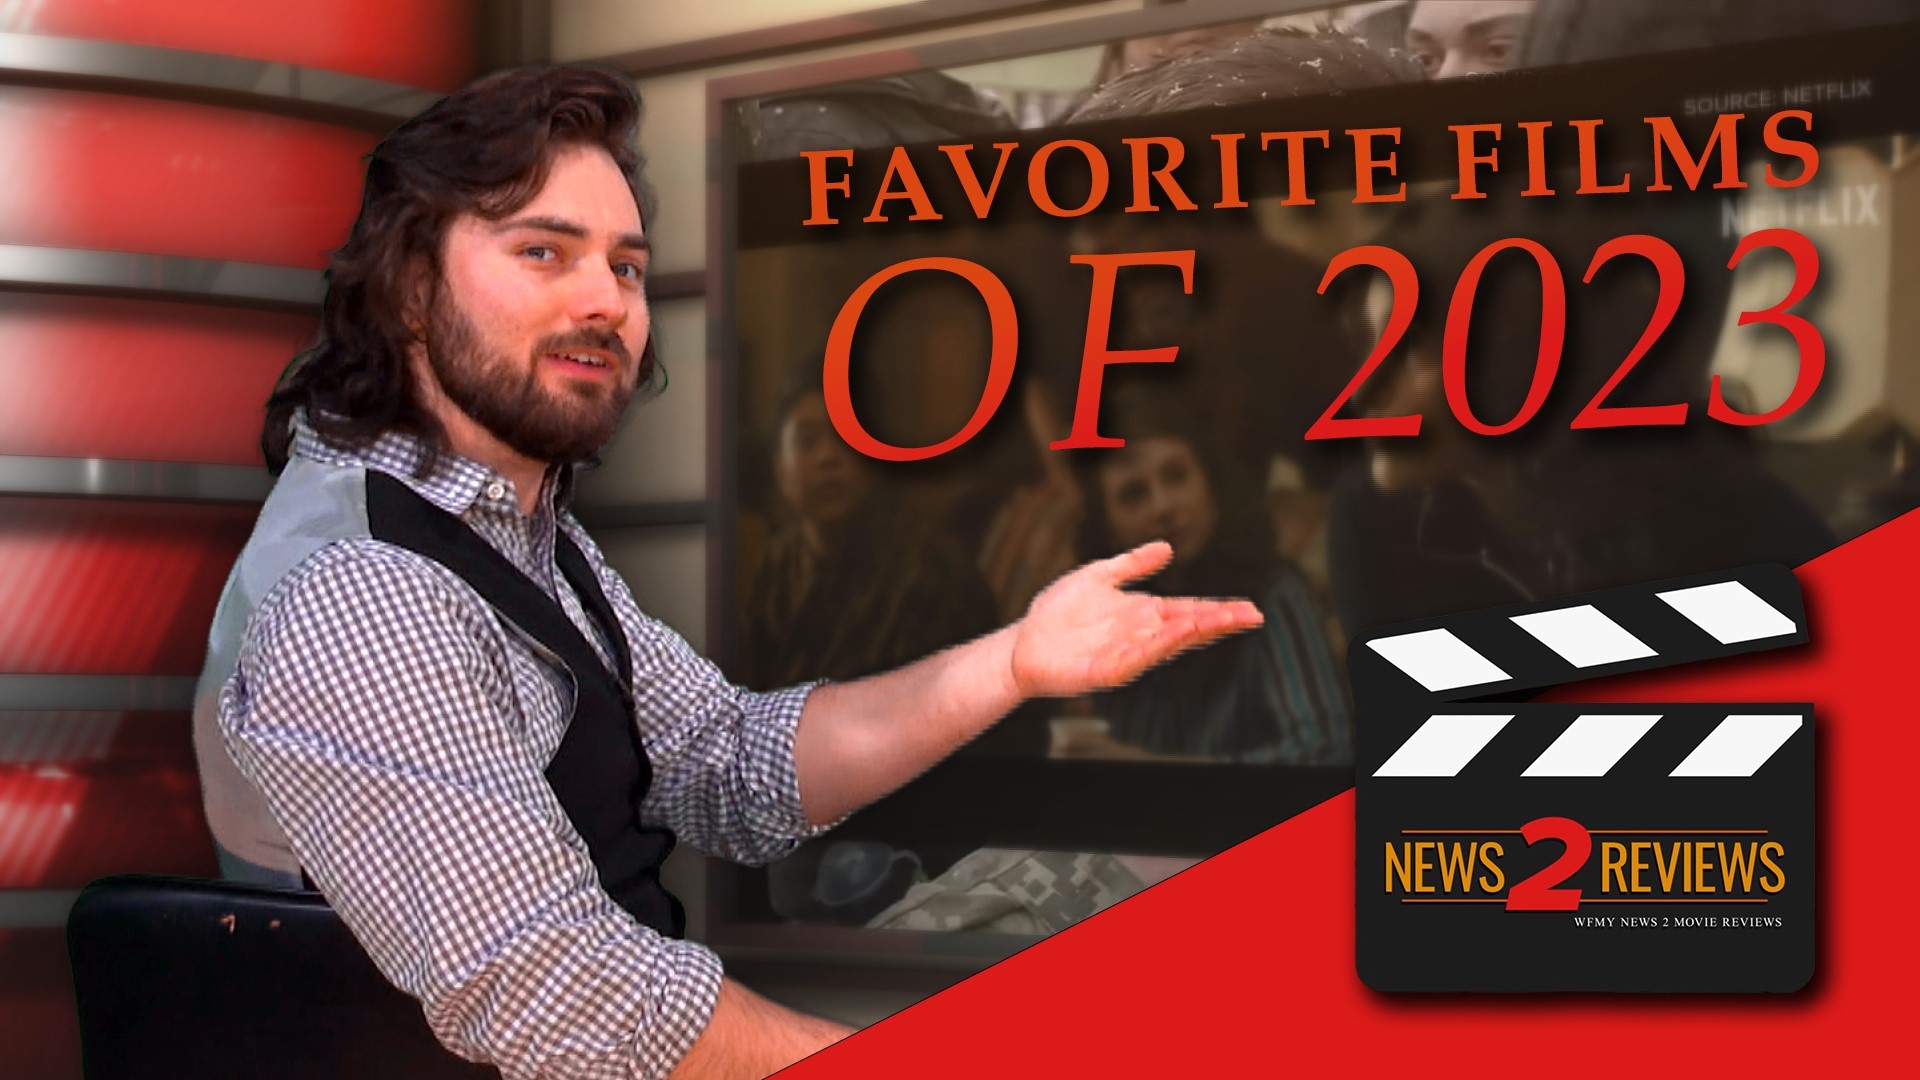 WFMY News 2's movie critic Manning Franks shares which films ranked at the top of his list in 2023.